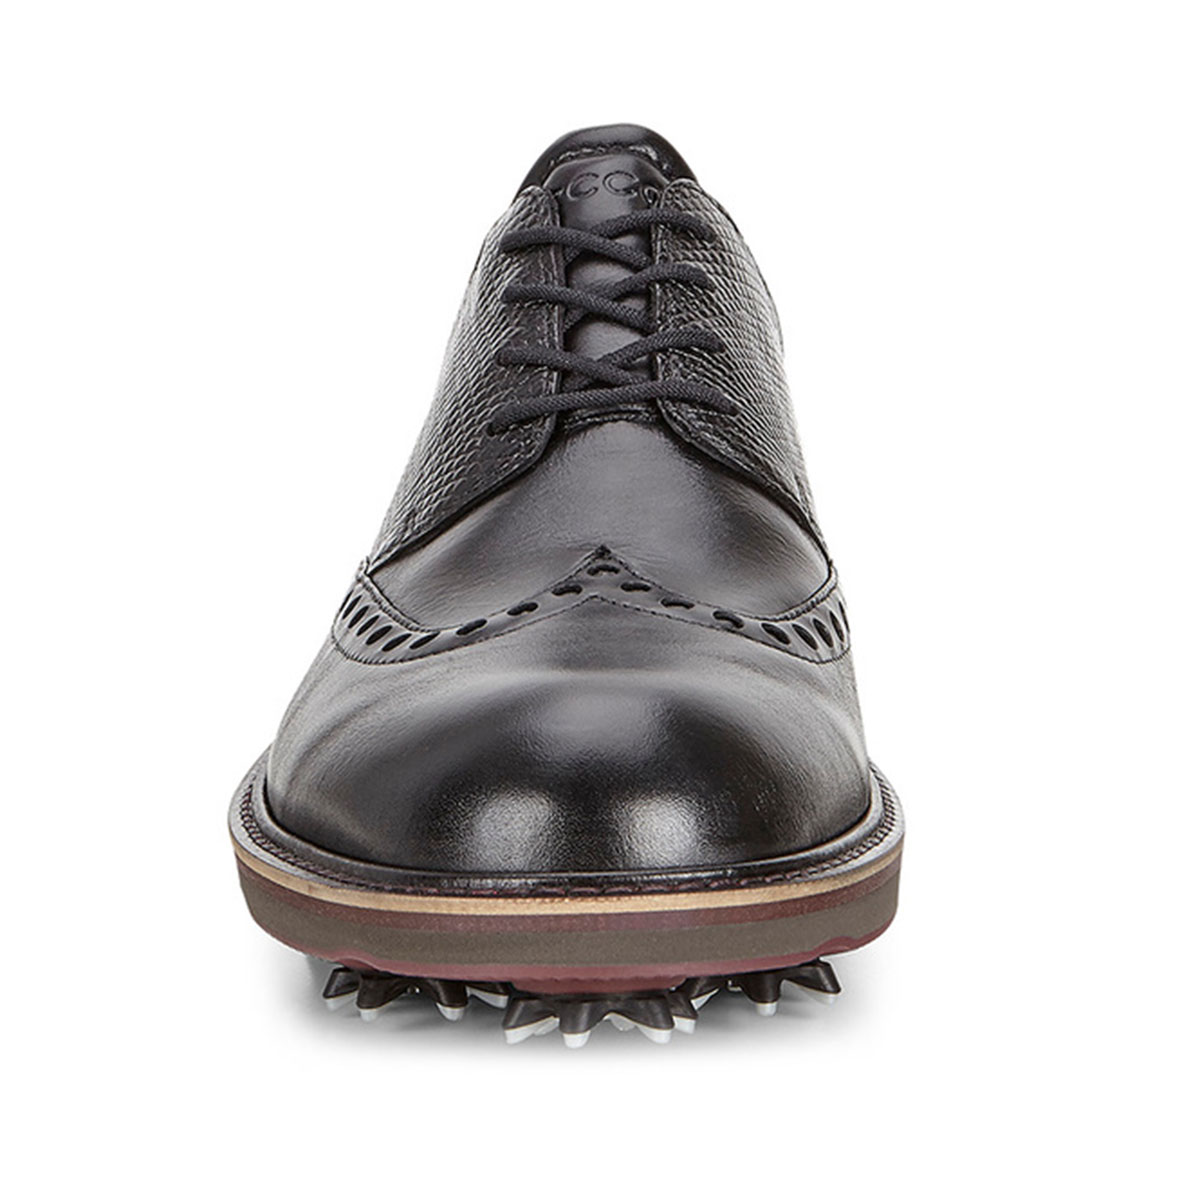 ECCO Men's LUX Spiked Golf Shoes from american golf